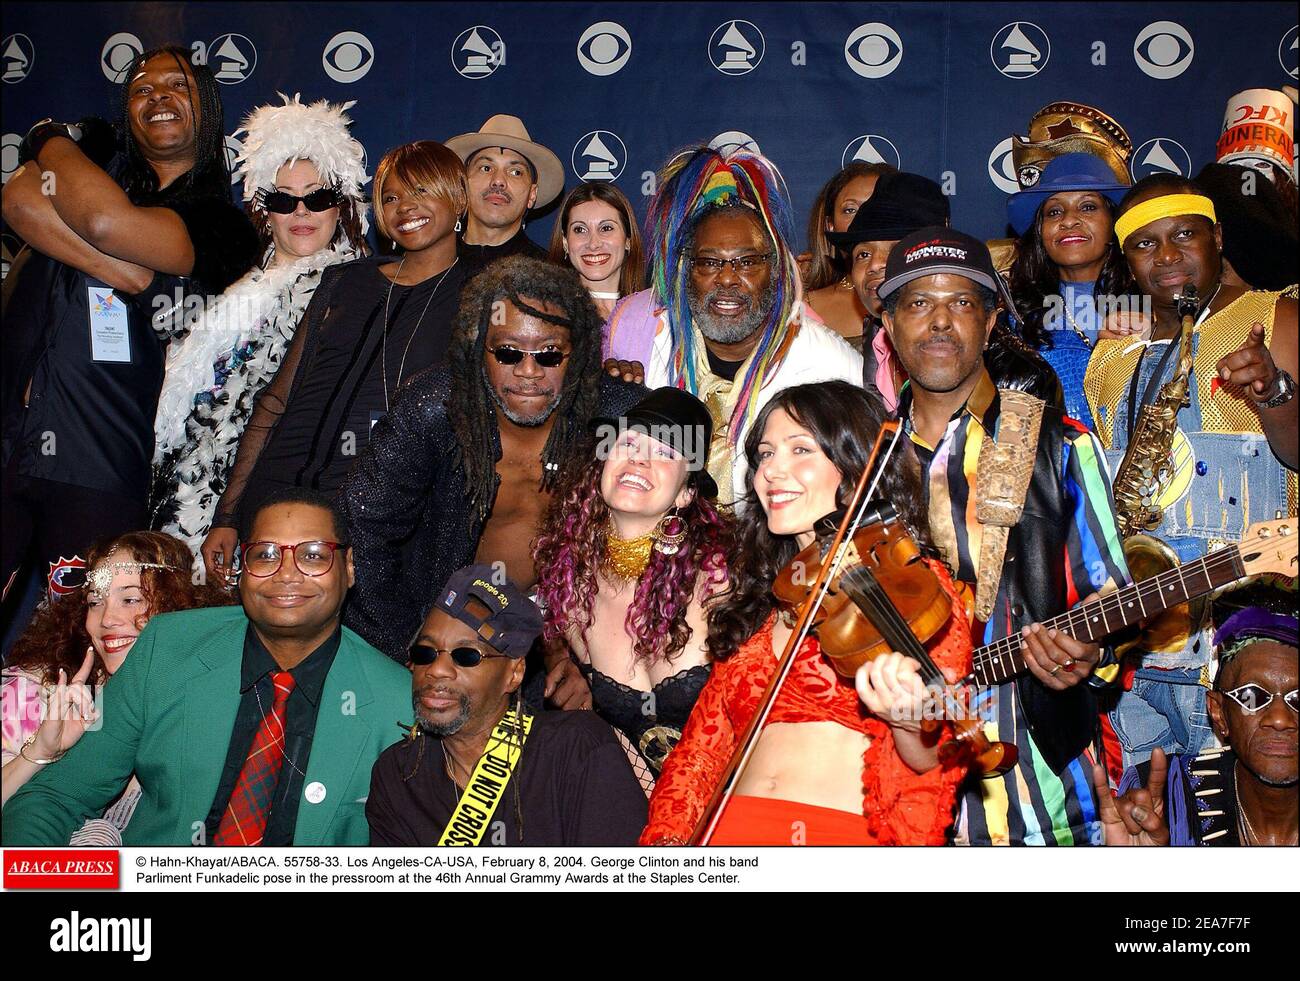 © Hahn-Khayat/ABACA. 55758-33. Los Angeles-CA-USA, February 8, 2004. George Clinton and his band Parliament Funkadelic pose in the pressroom at the 46th Annual Grammy Awards at the Staples Center. Stock Photo